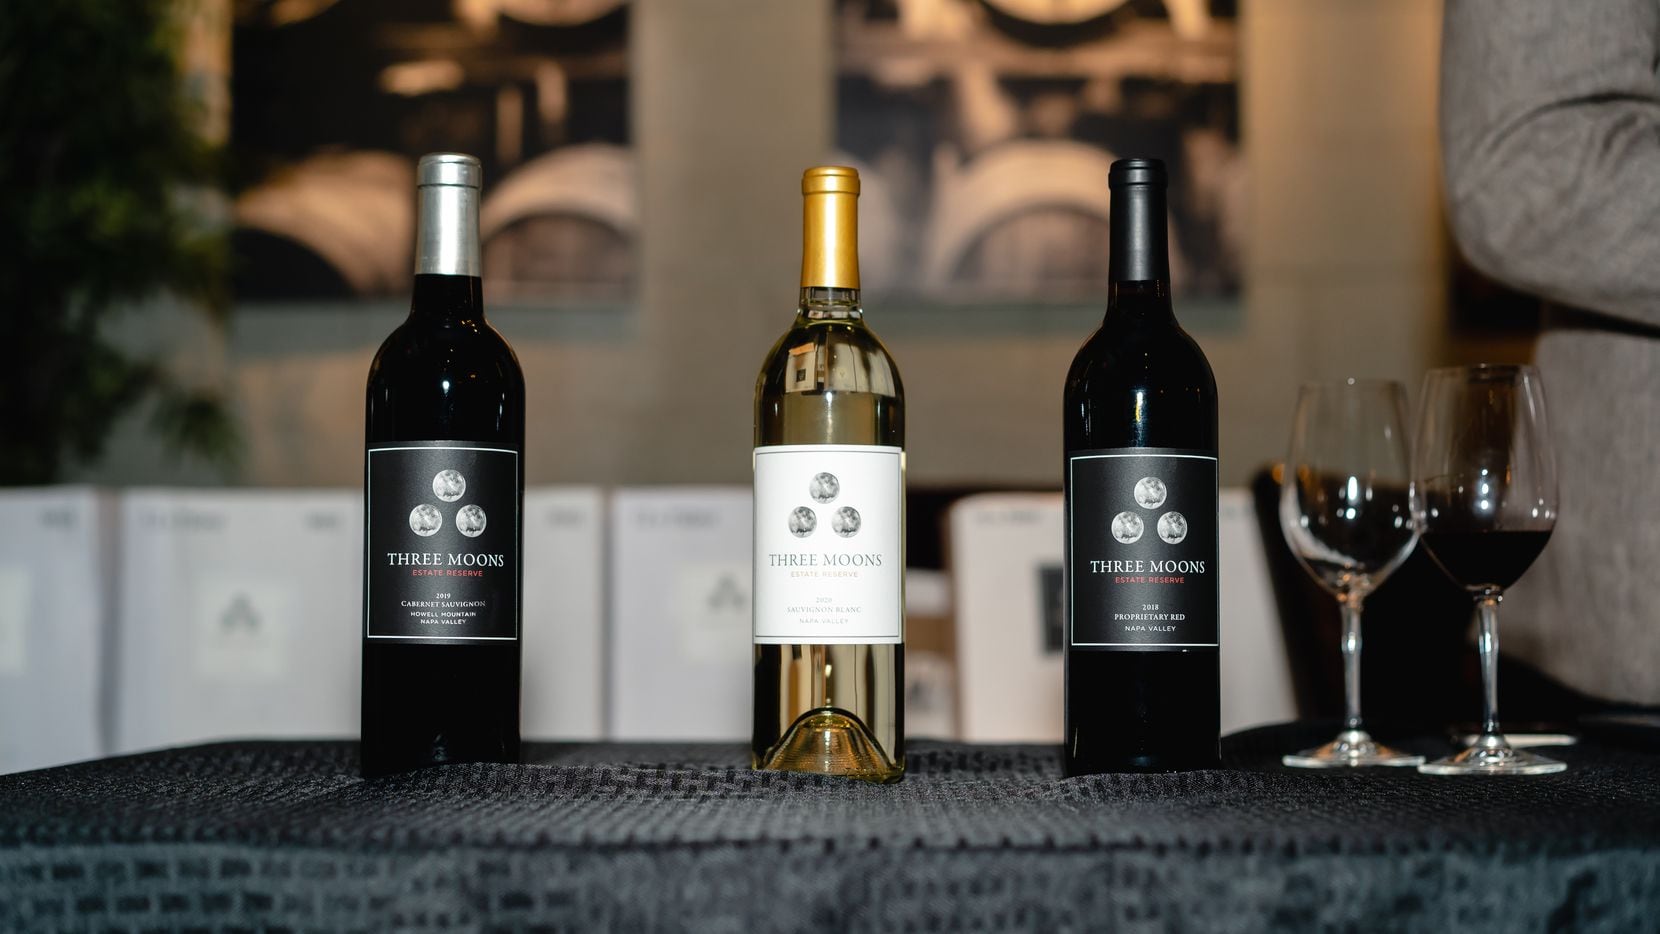 Real Housewives of Dallas star Tiffany Moon launches Three Moons wine label.